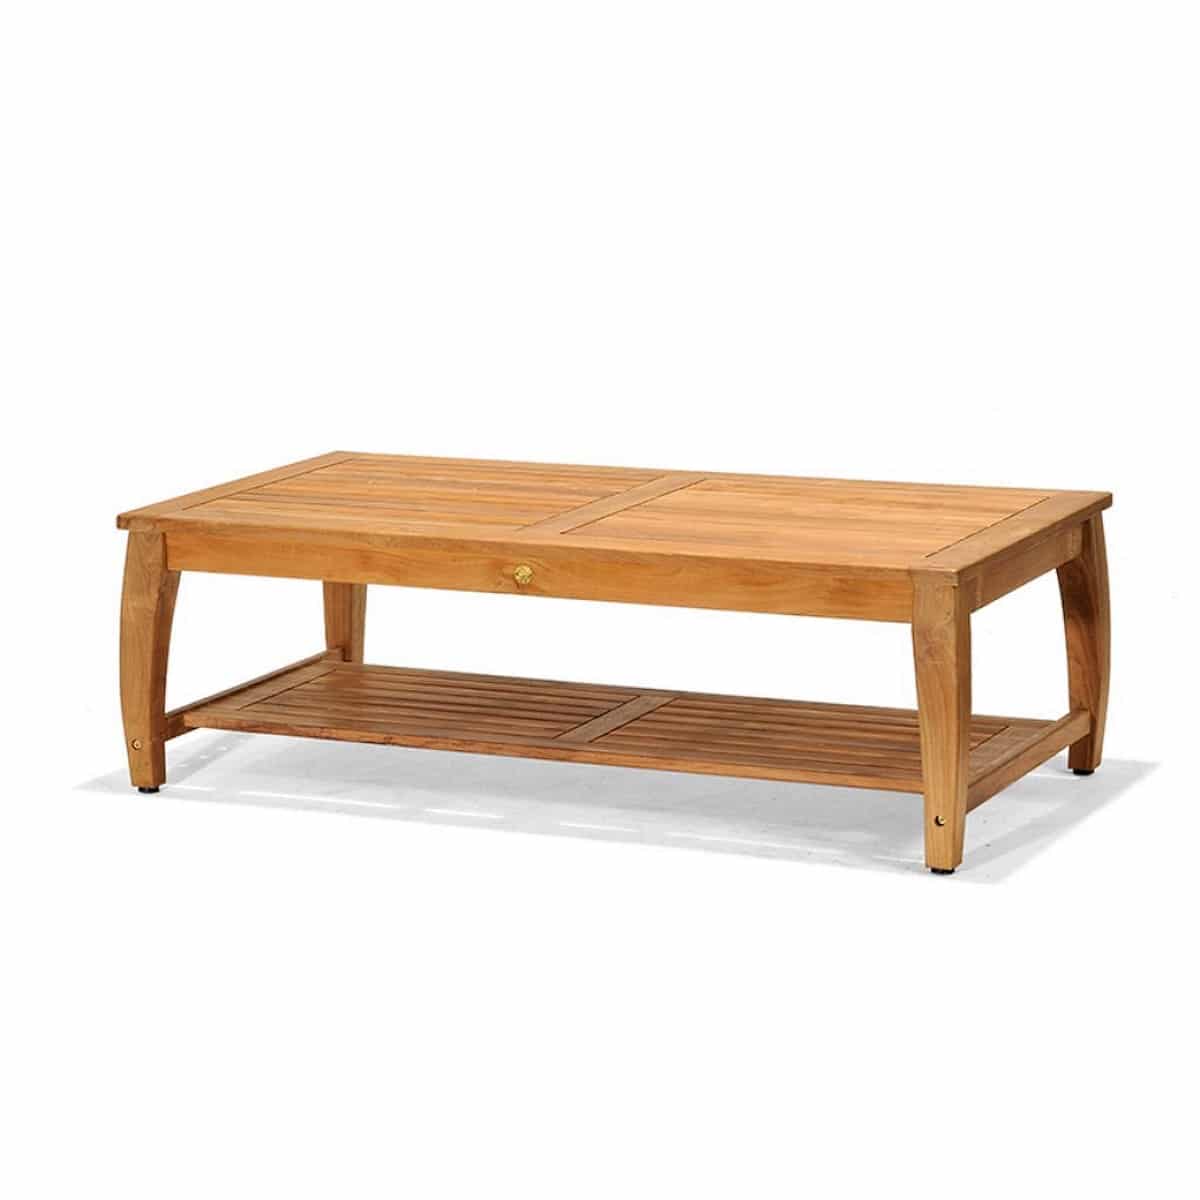 Forever Patio | Miramar Plantation Teak Rectangle Coffee Table | FP-MIR-CT-TK Seating Forever Patio 